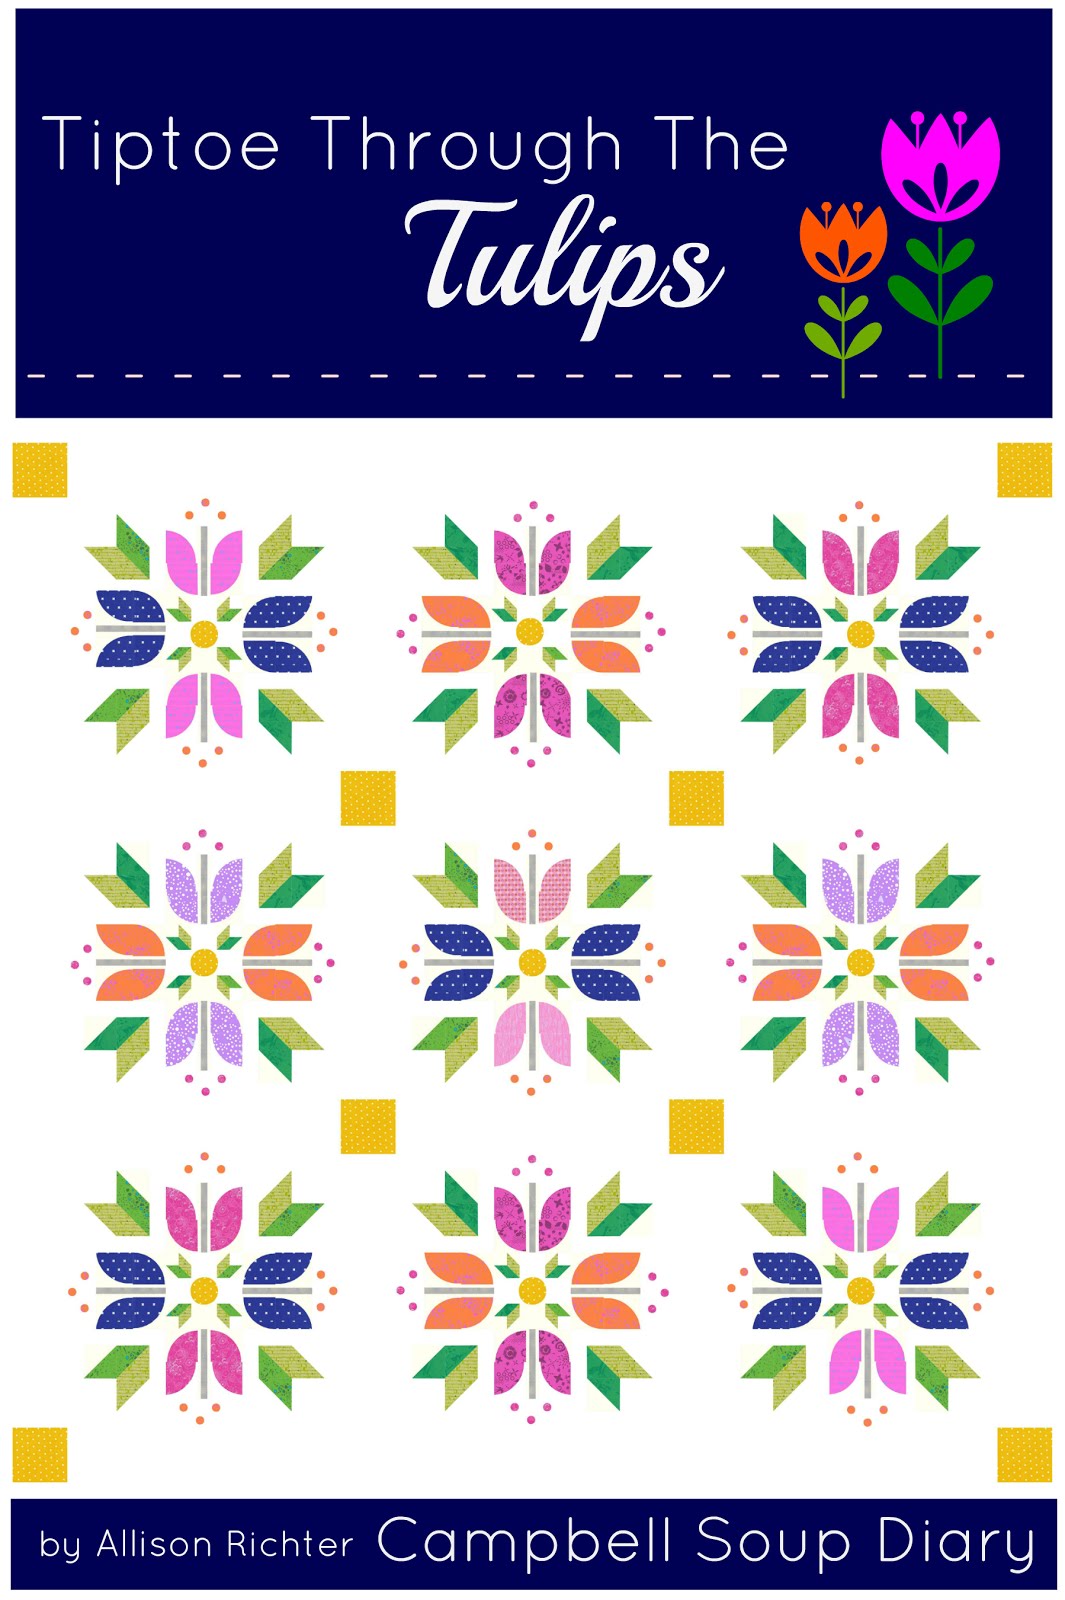 Campbell Soup Diary Tiptoe Through The Tulips Pattern Introduction